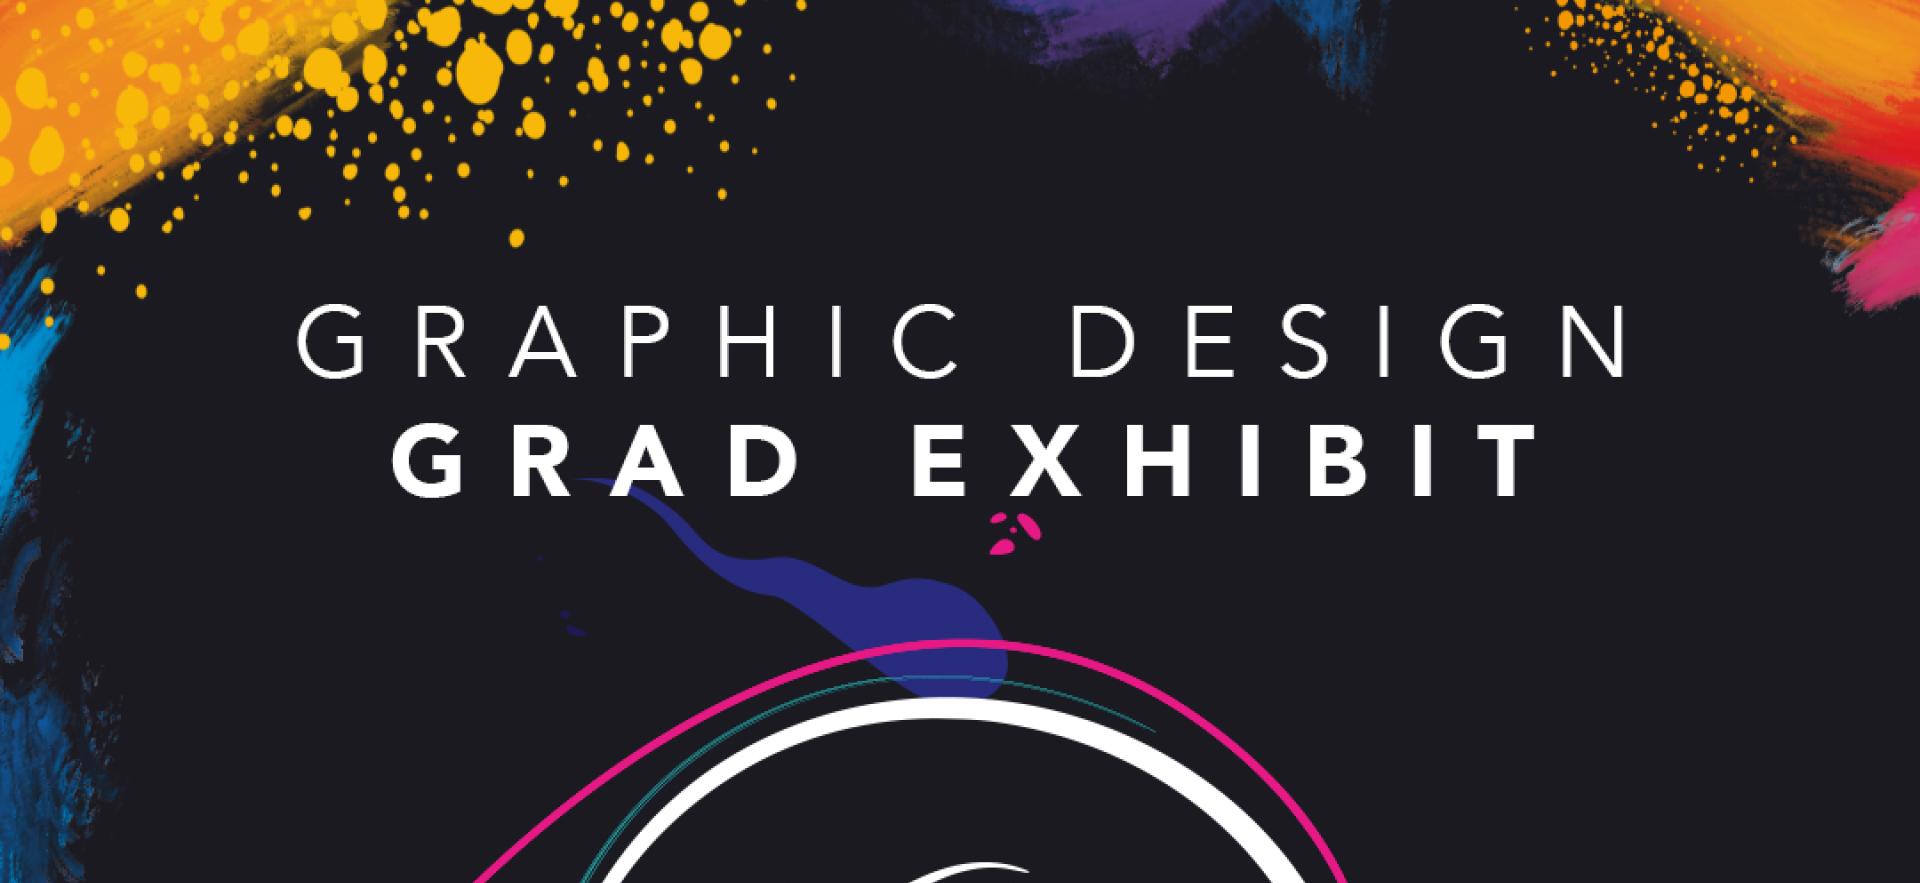 graphic that says "Graphic Design Grad Exhibit 13 Impressions" in white writing with black background and splashes of colour